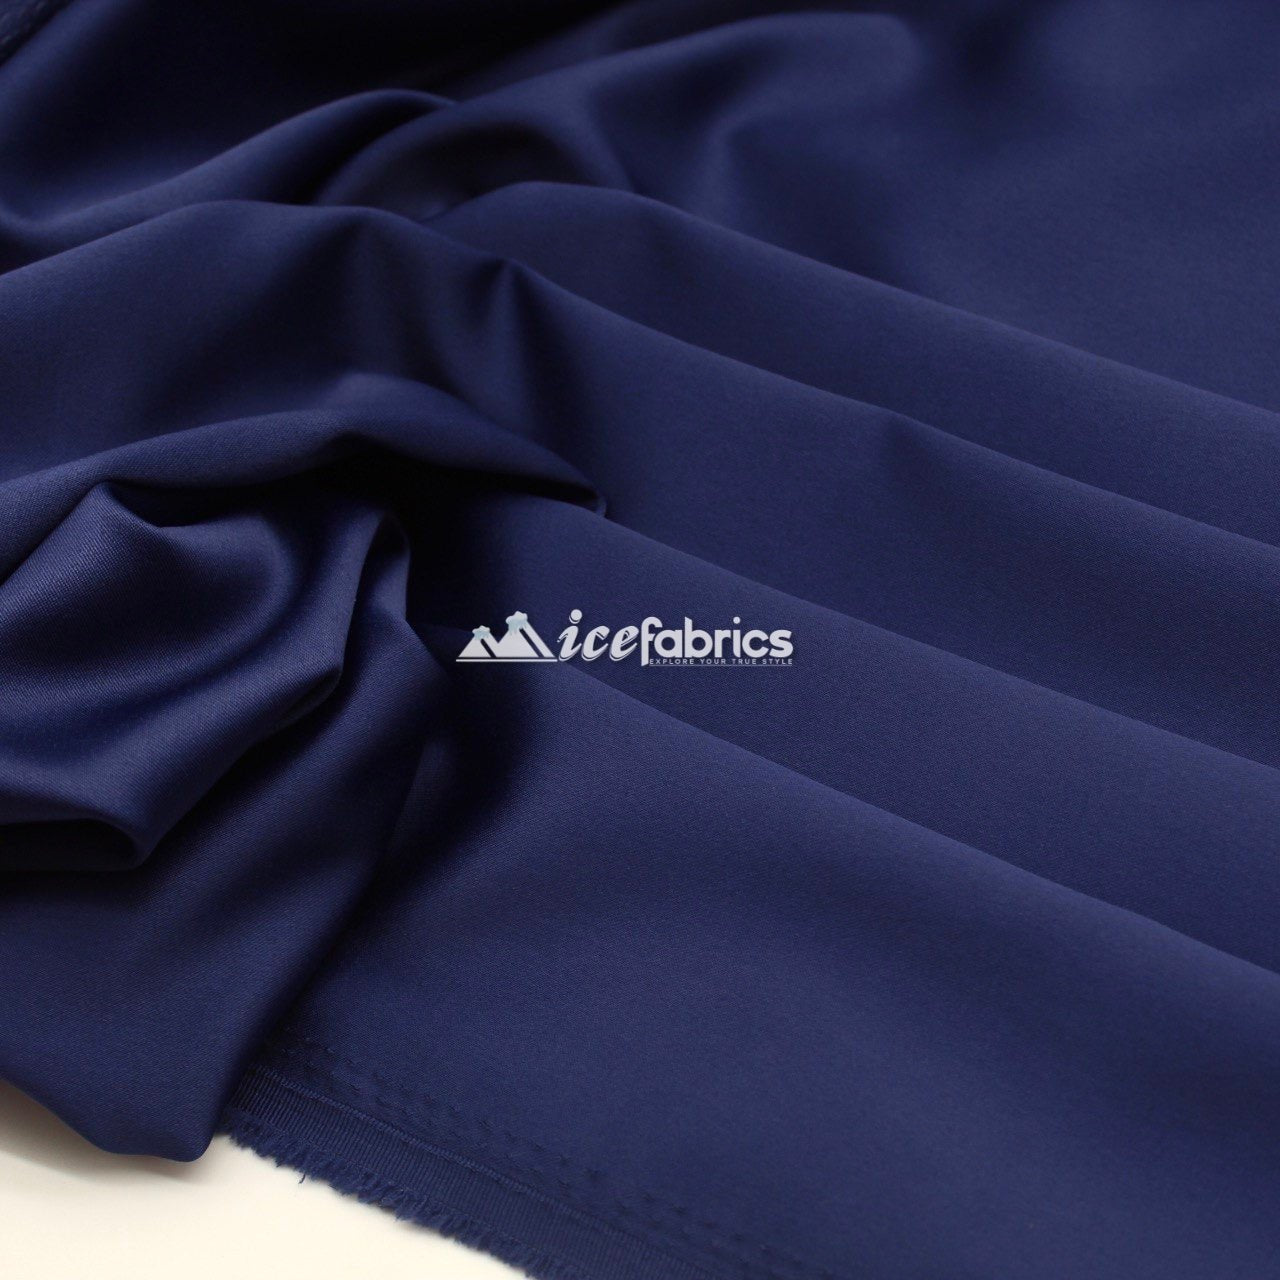 Armani Thick Solid Color Silky Stretch Satin Fabric Sold By The YardSatin FabricICE FABRICSICE FABRICSNavy BlueArmani Thick Solid Color Silky Stretch Satin Fabric Sold By The Yard ICE FABRICS Navy Blue